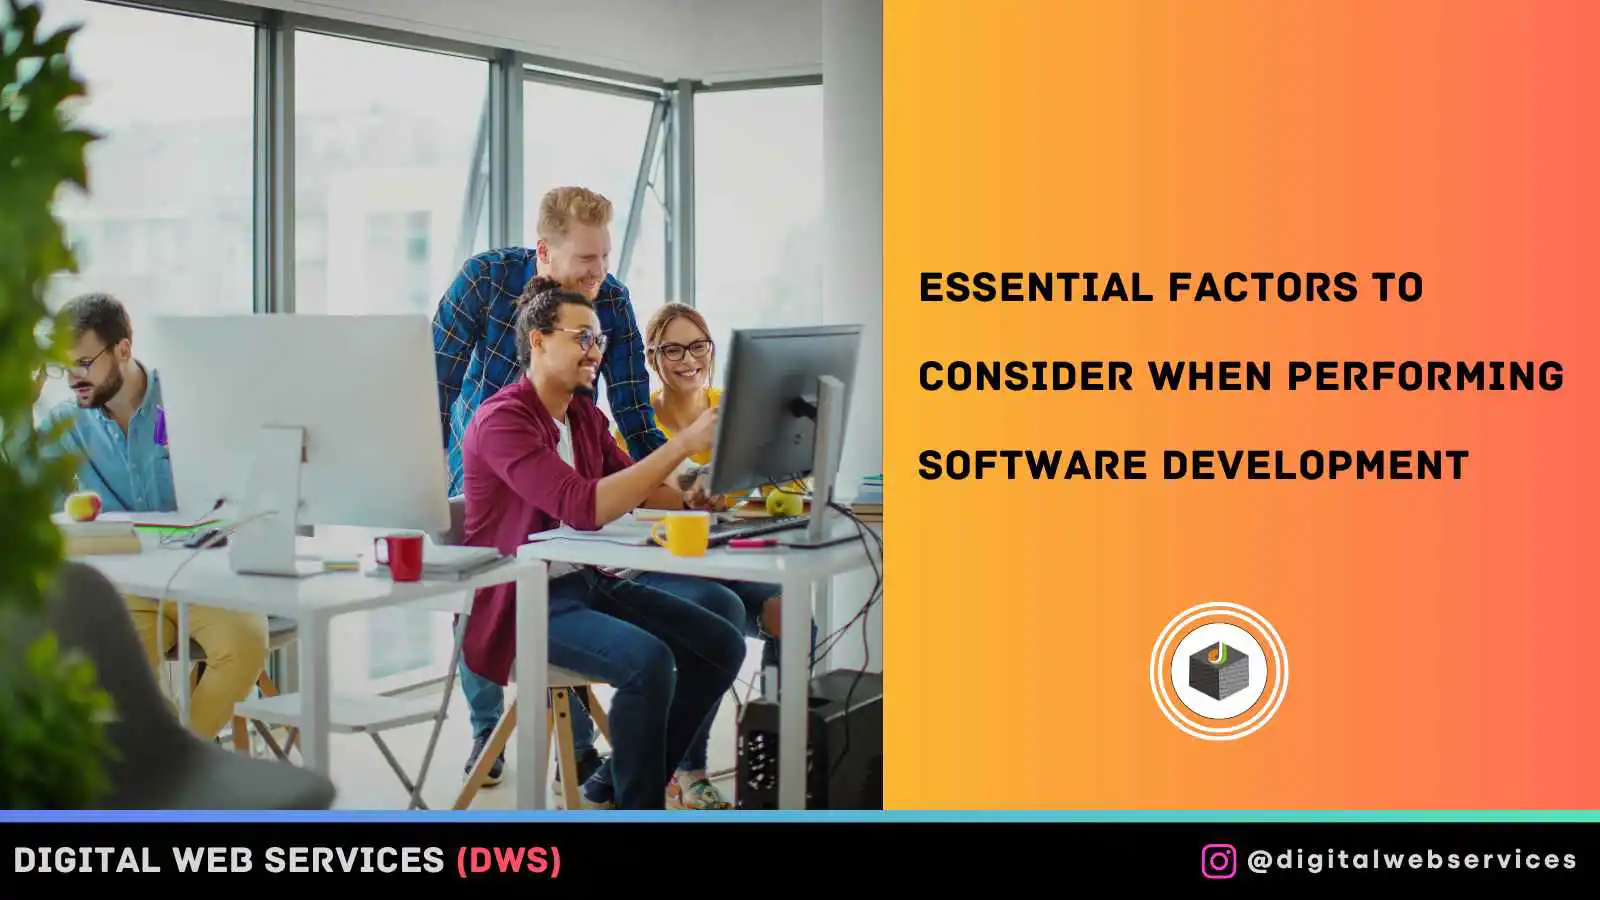 Essential Factors to Consider When Performing Software Development